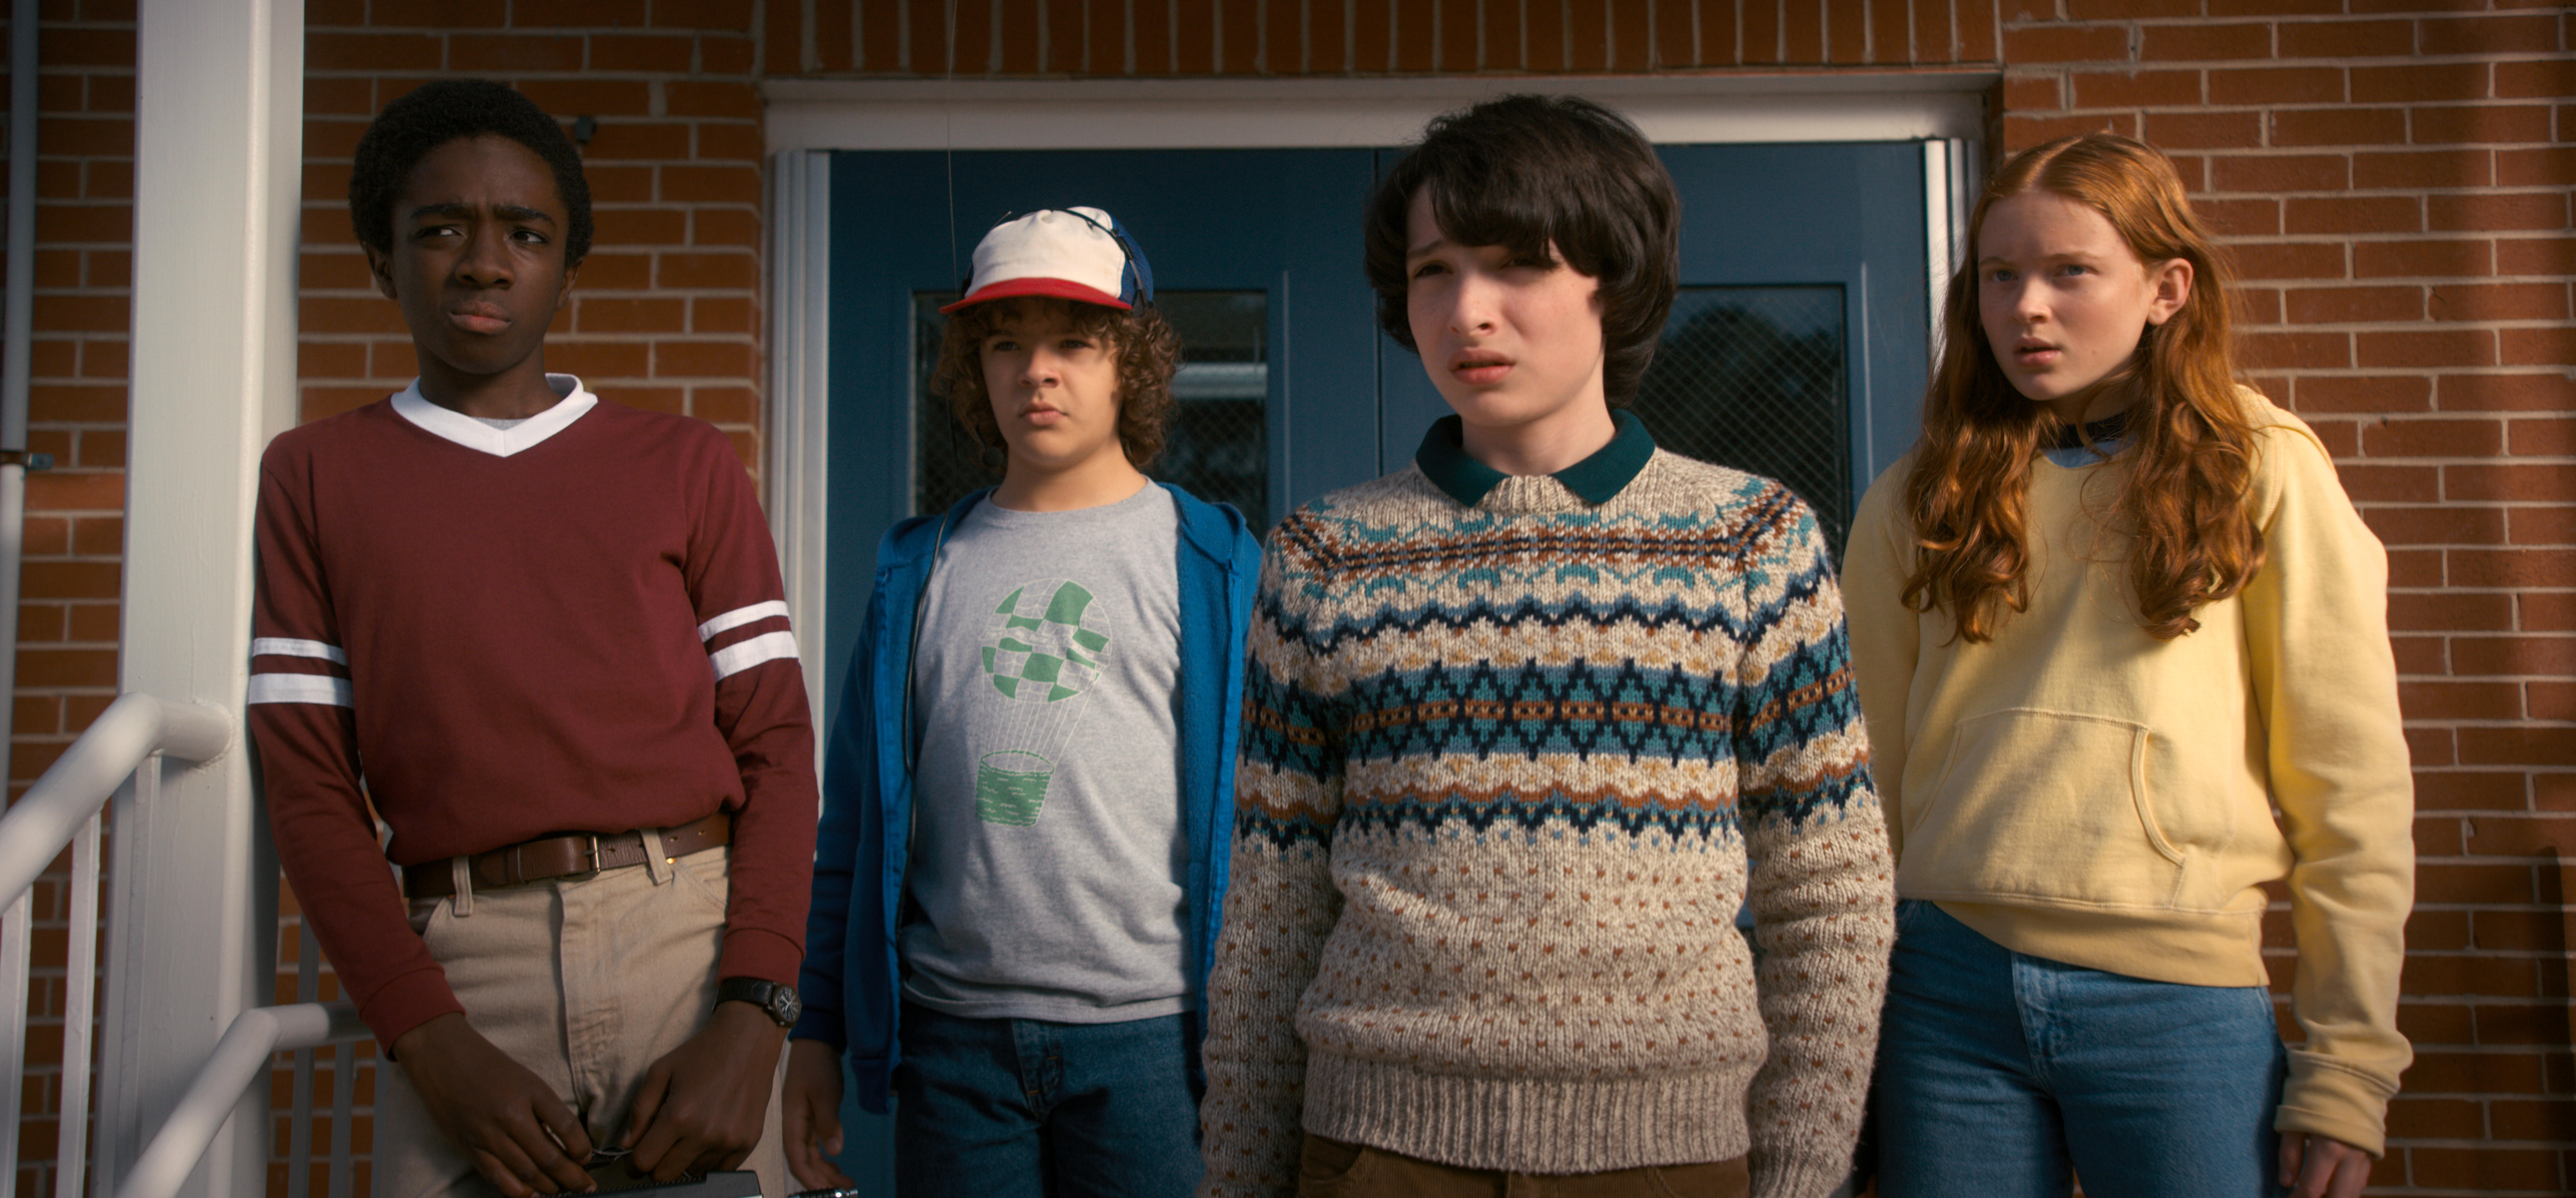 What Time Does Season 3 of 'Stranger Things Come Out on Netflix?